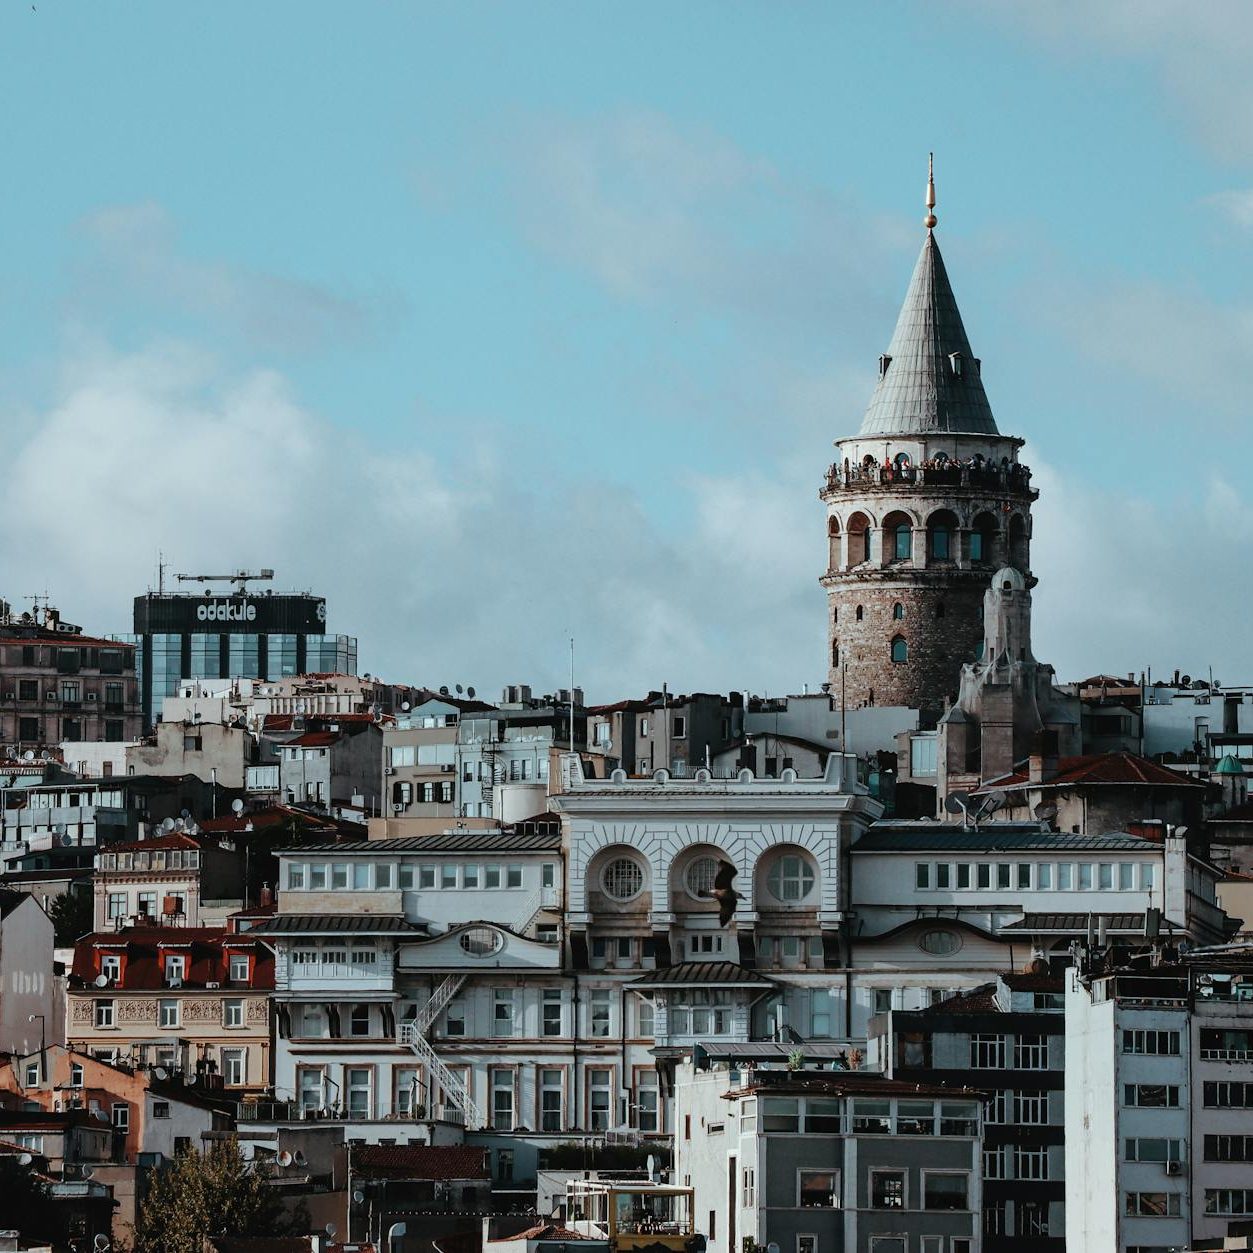 view of buildings in istanbul and the galata tower